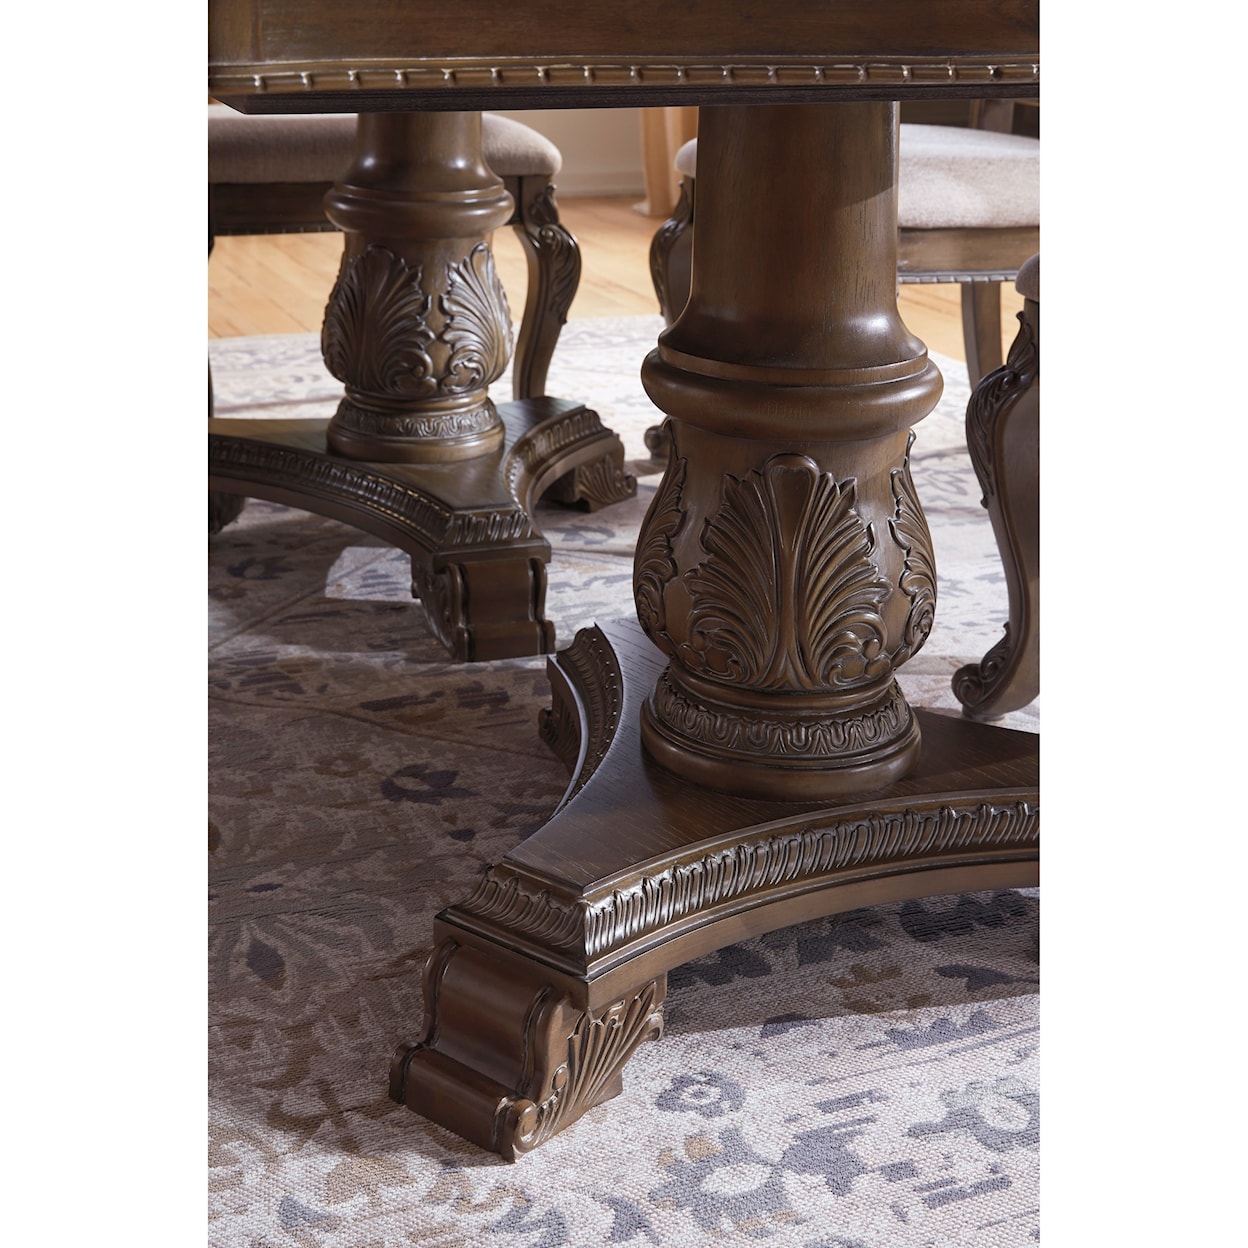 Signature Design by Ashley Charmond 11pc Dining Room Group